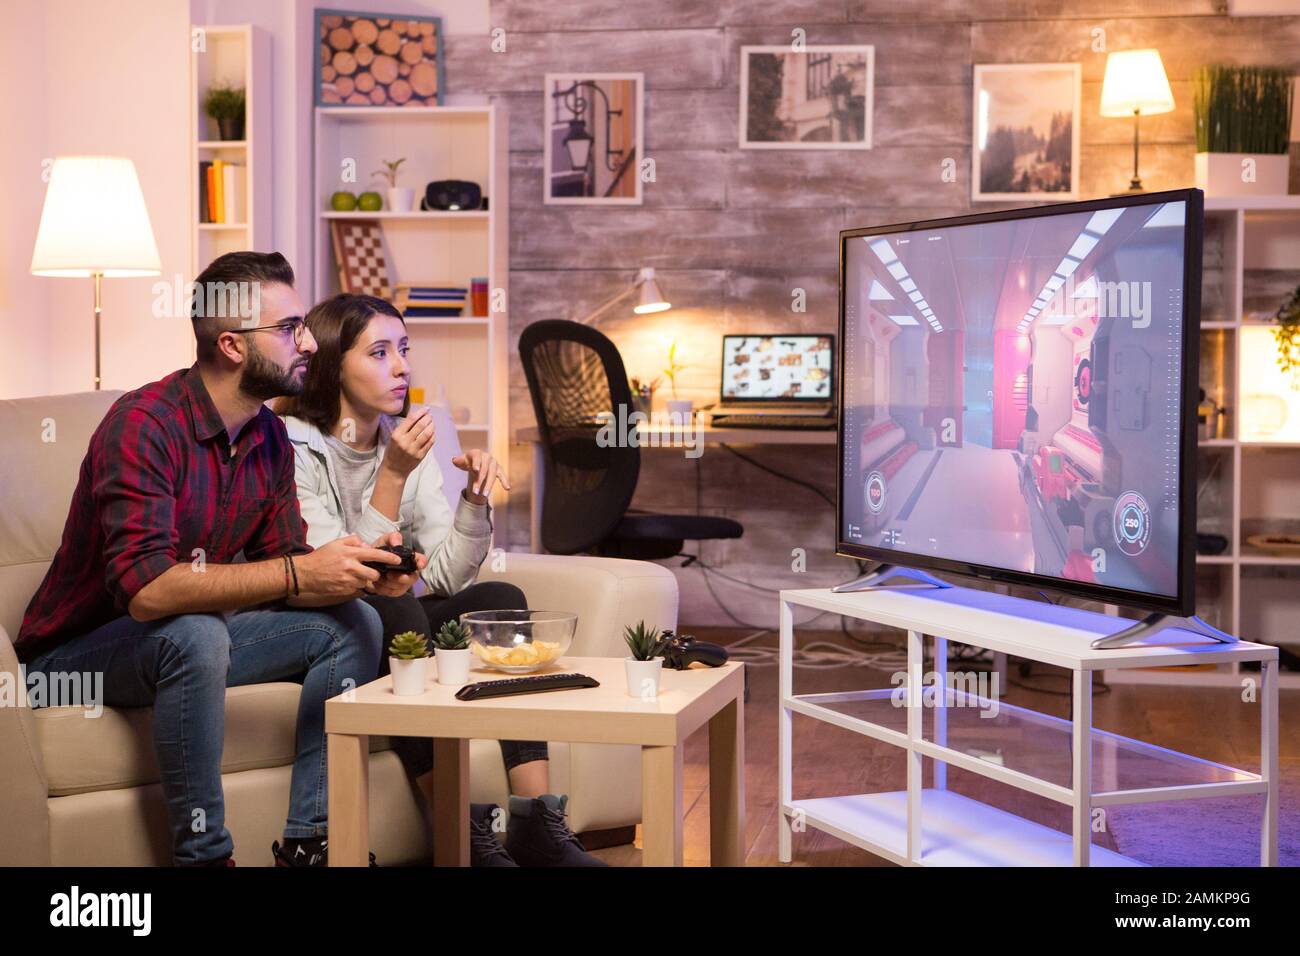 Man sitting on couch and playing video games on television while his girlfriend is eating chips. Stock Photo